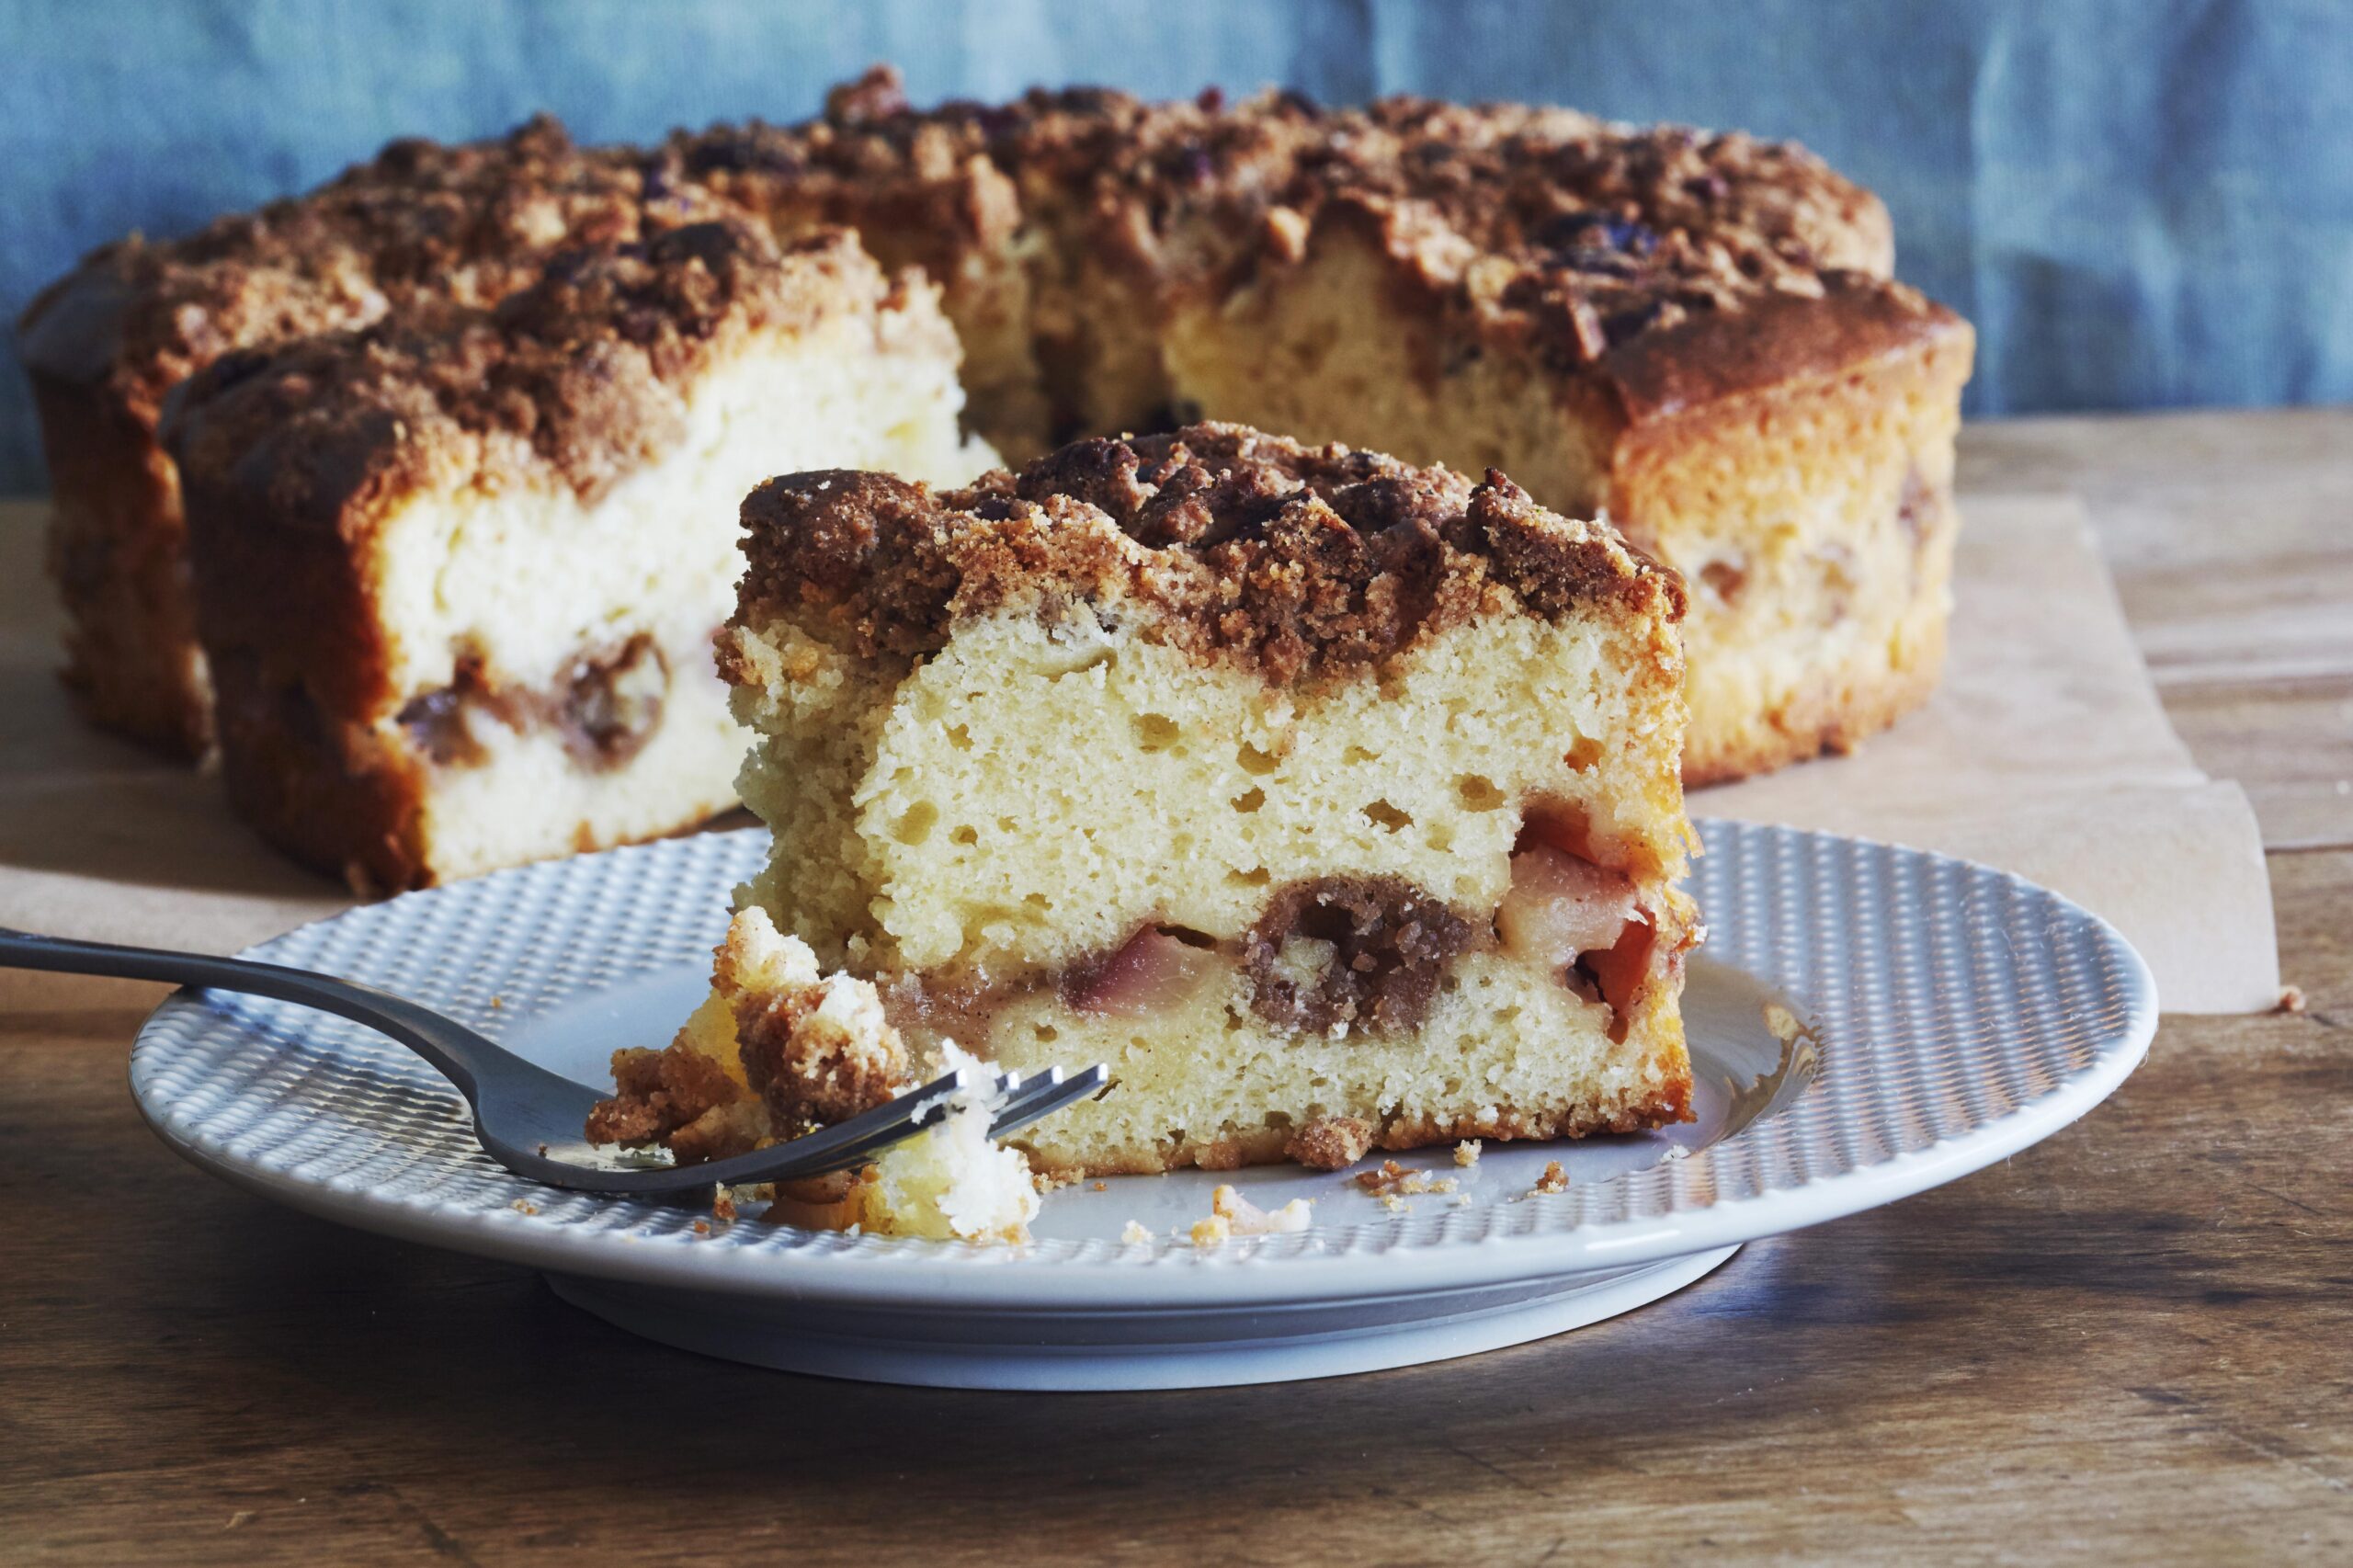  Your house will smell amazing while this cake is baking in the oven.